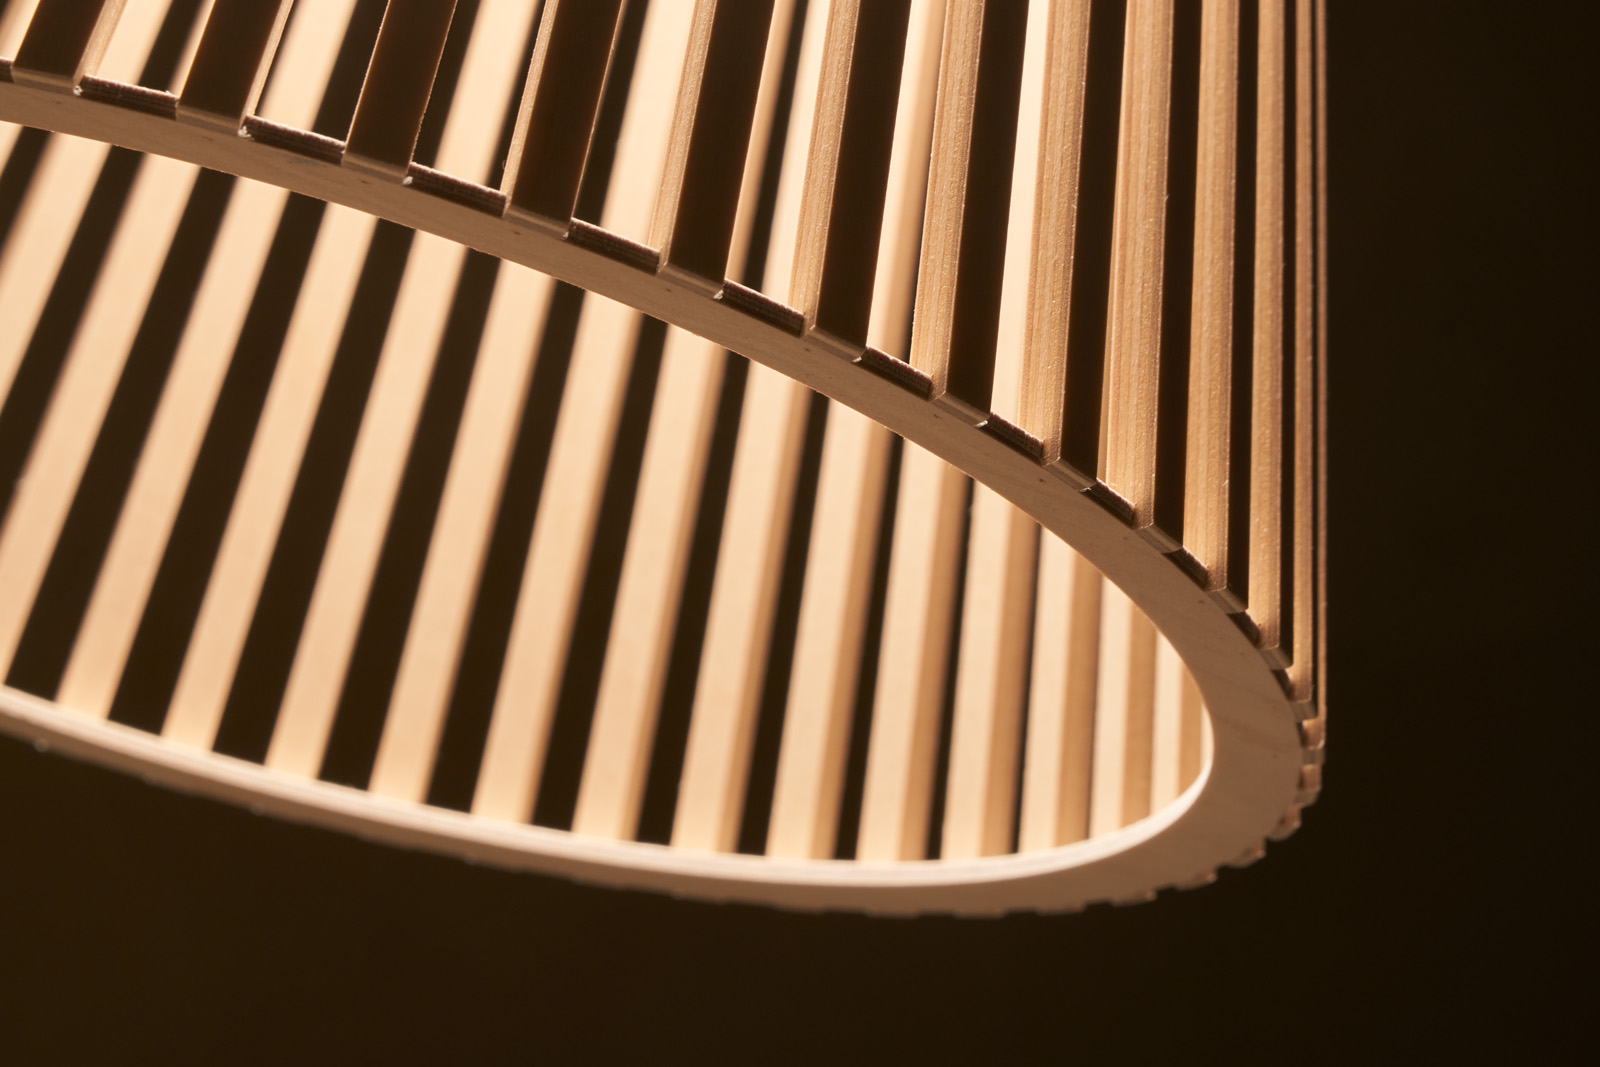 A close-up of a Secto pendant lamp, showing the lower ring in front of a dark background.